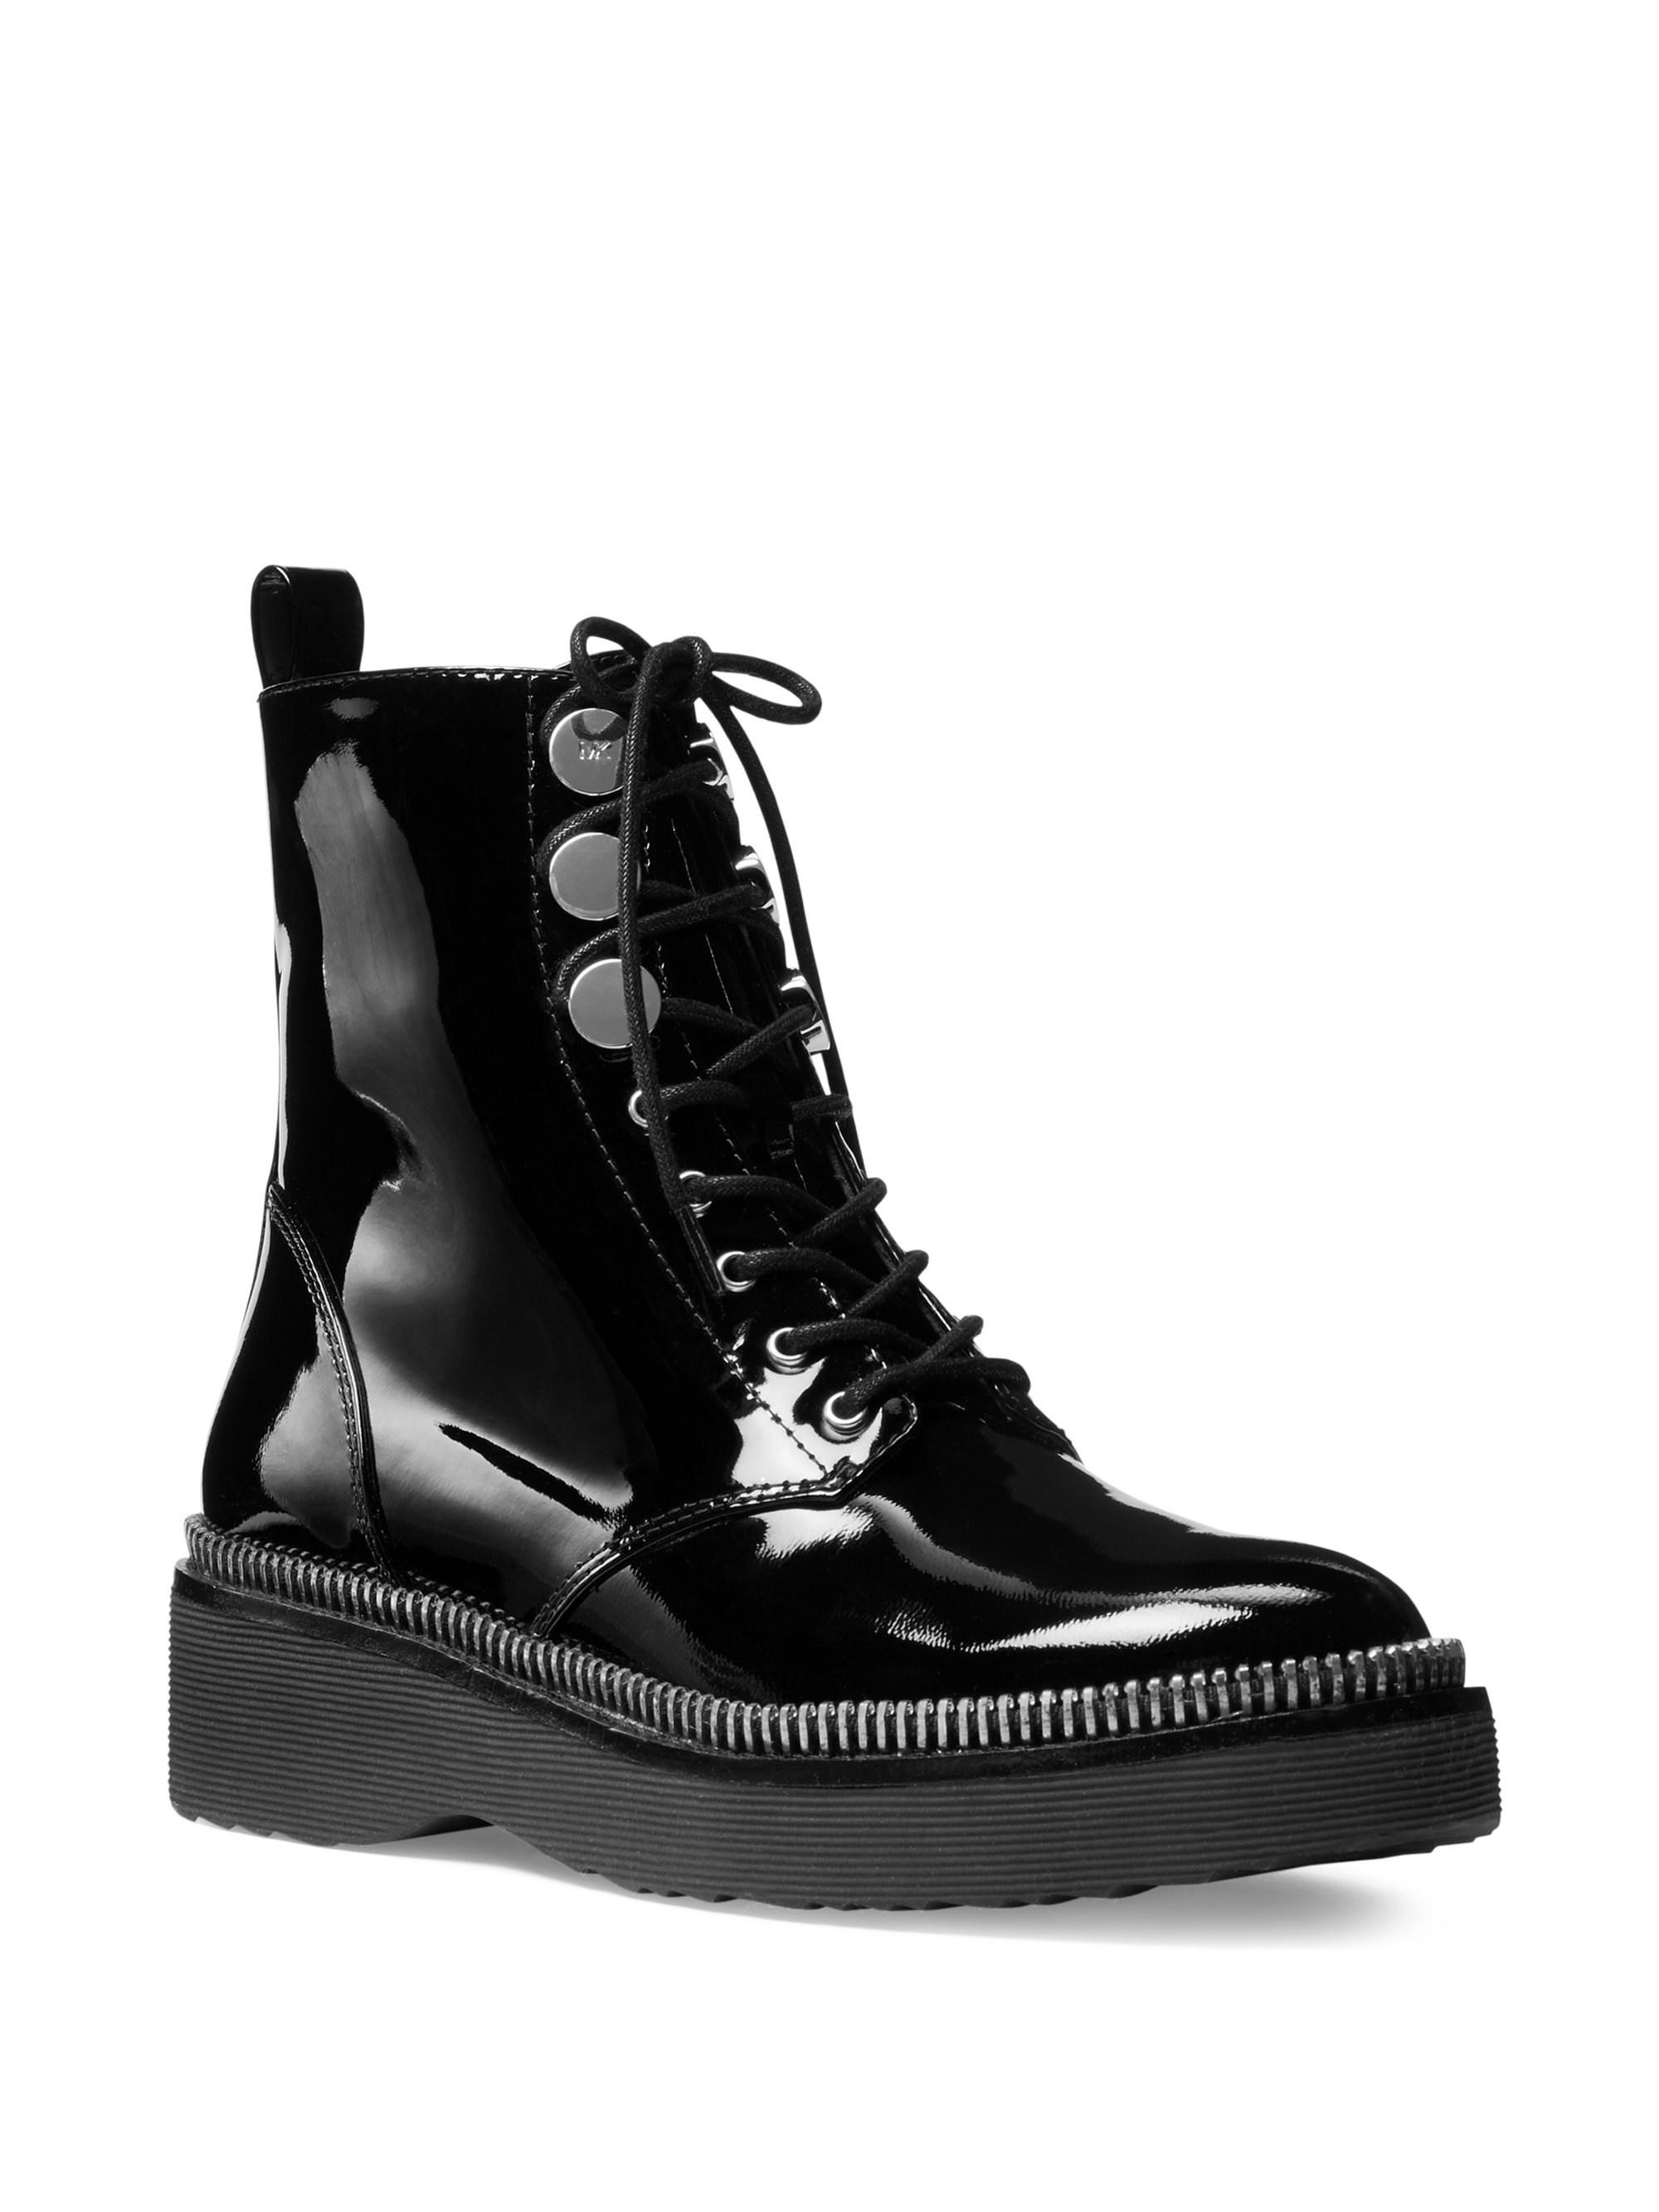 Michael Michael Kors Haskell Patent Leather Combat Boot In Black - Lyst 0E0